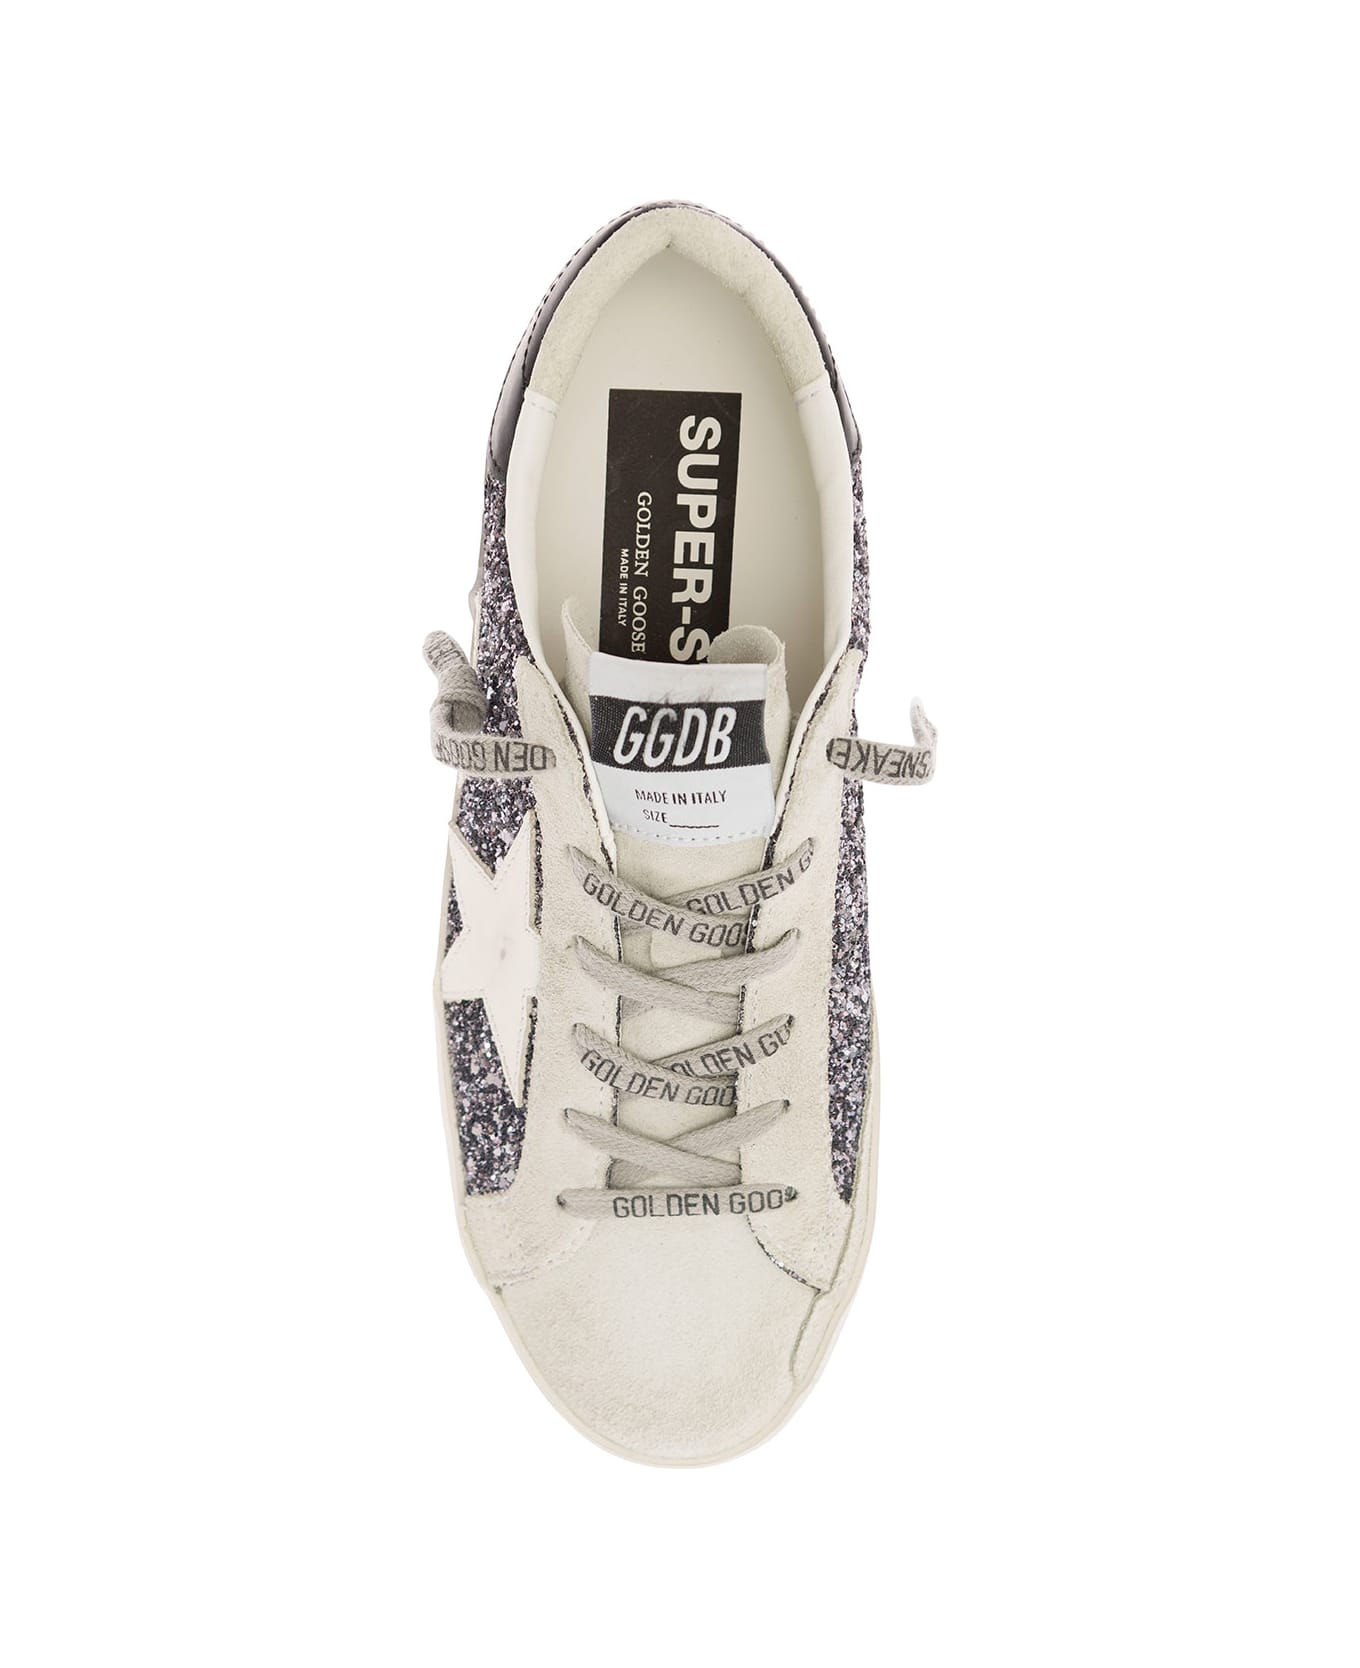 Golden Goose 'superstar' White Low Top Sneakers With Glitters In Vintage Looking Leather Woman - Grey スニーカー